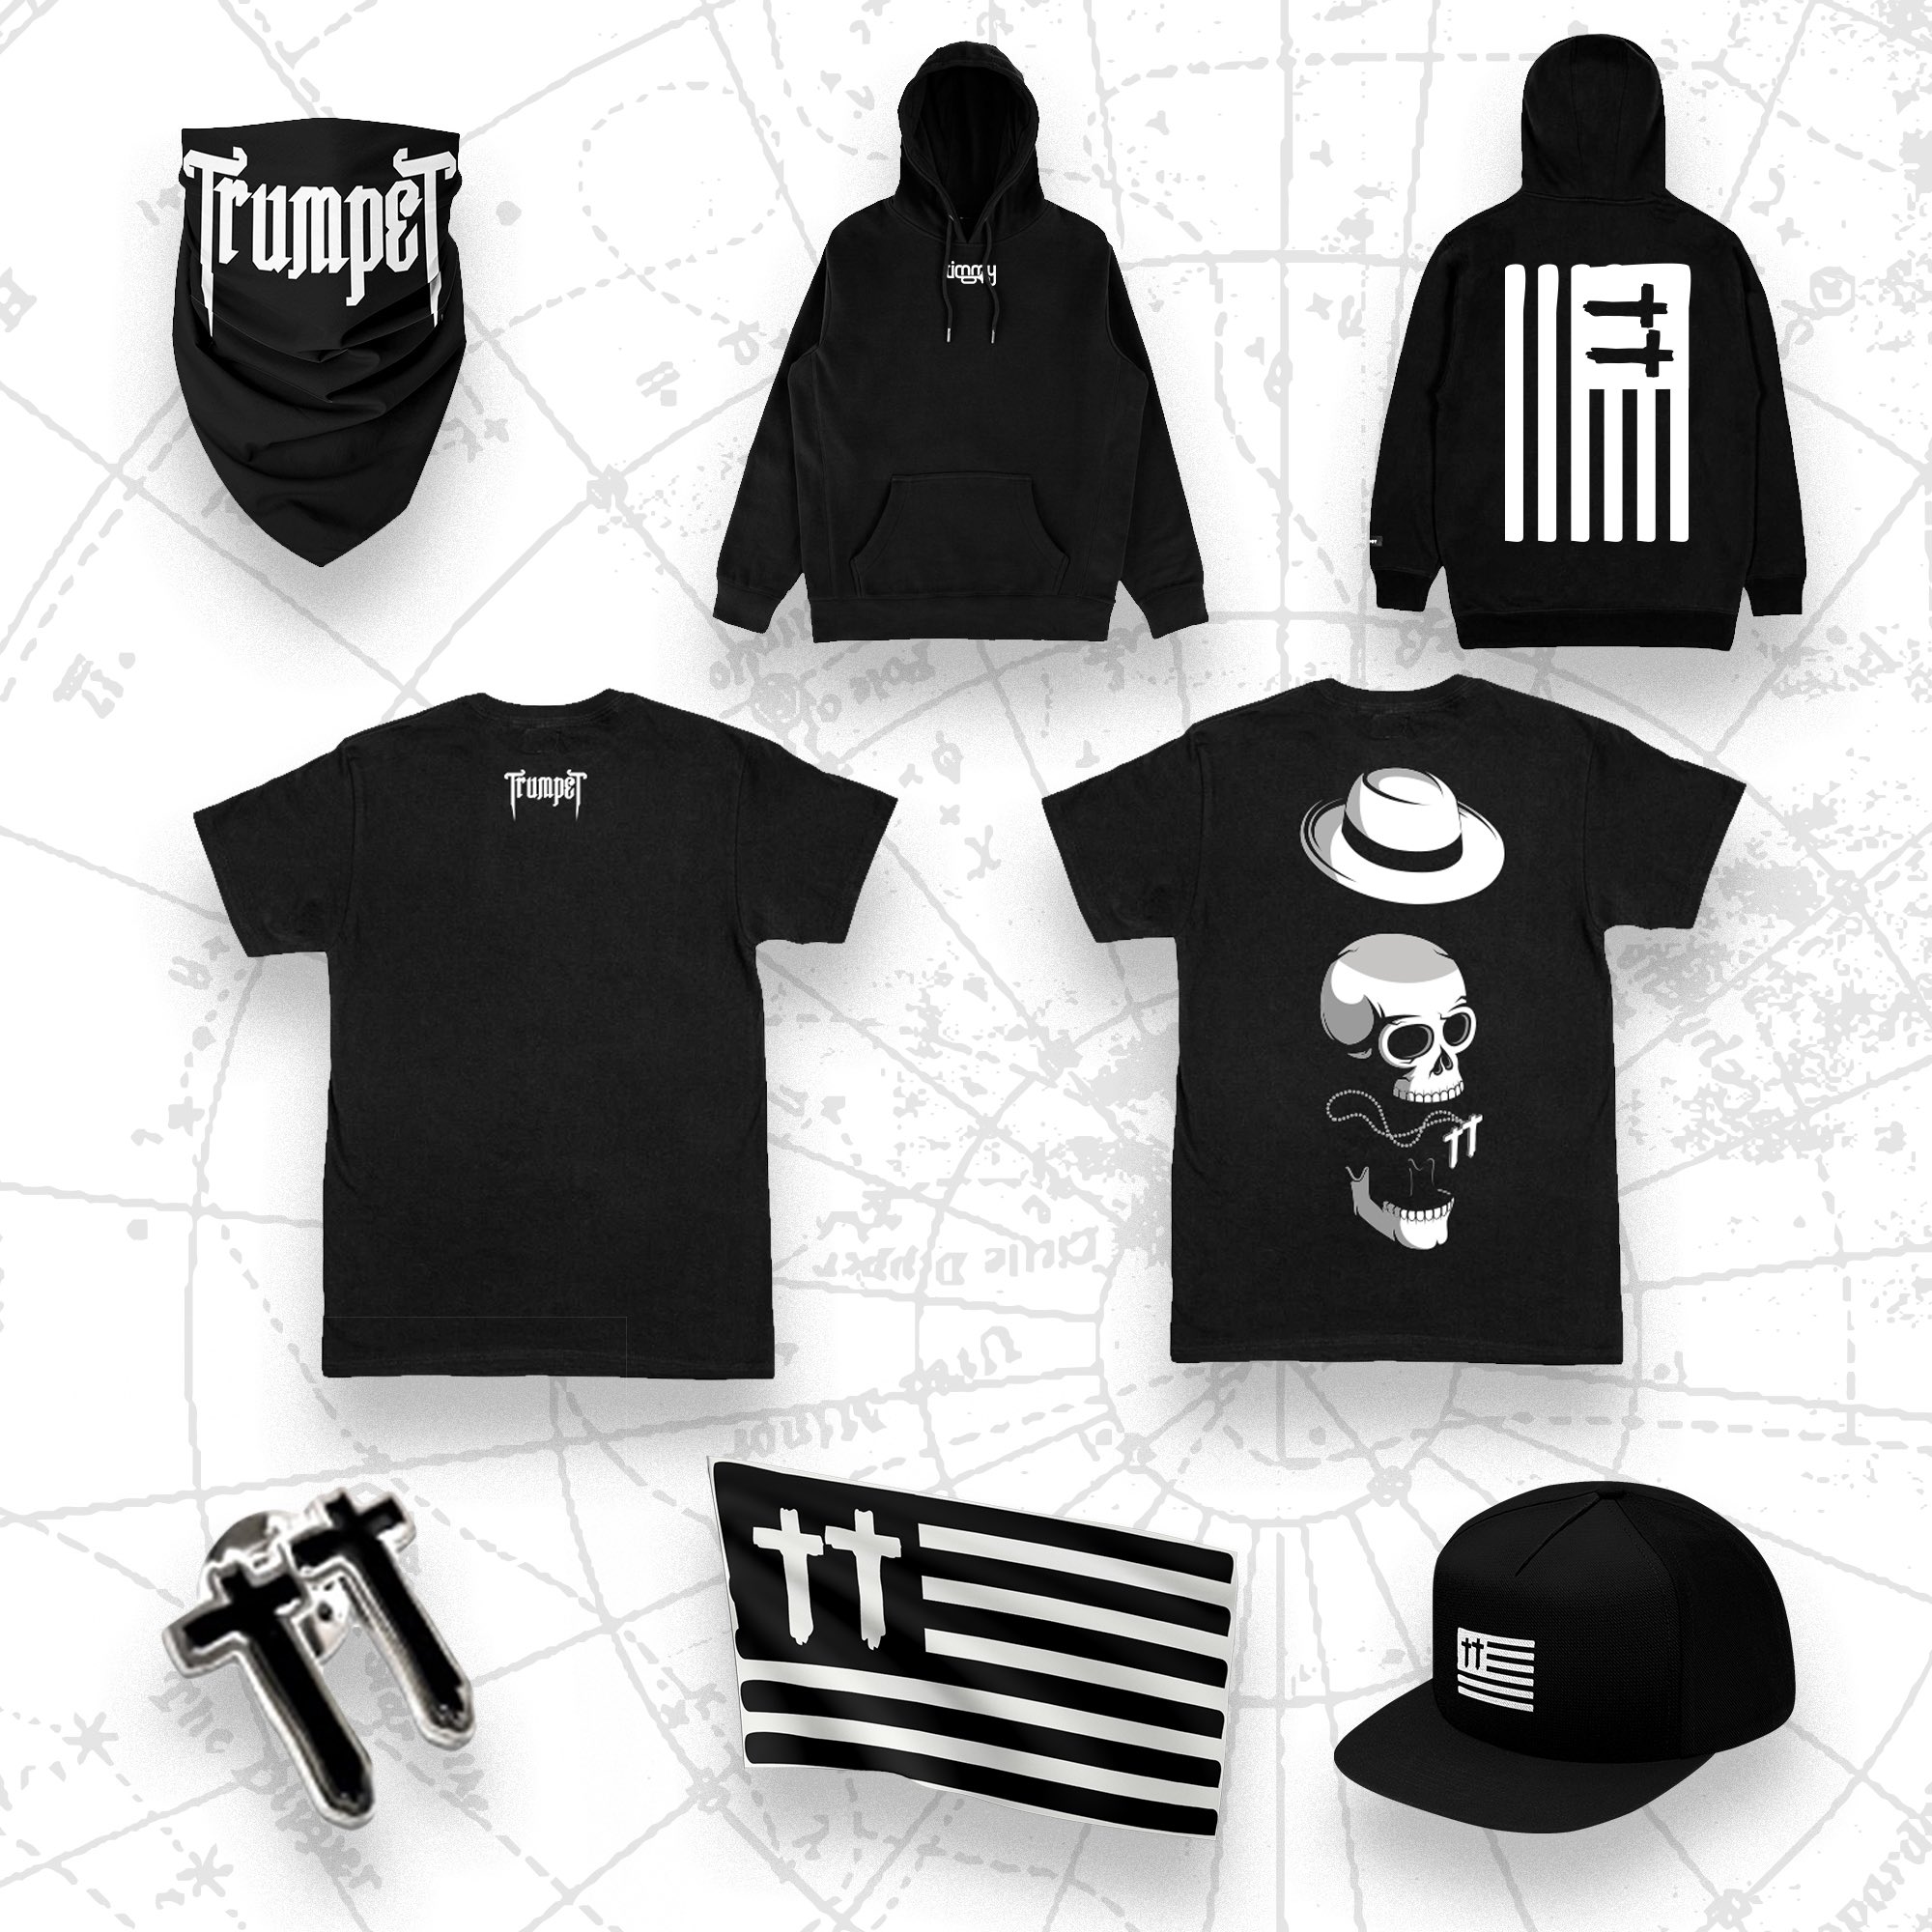 Timmy Trumpet on X: "NEW LIMITED EDITION MERCH!! First in best dressed  🤟🇺🇸 https://t.co/im1sbadgVk https://t.co/PpkWA0H3Li" / X